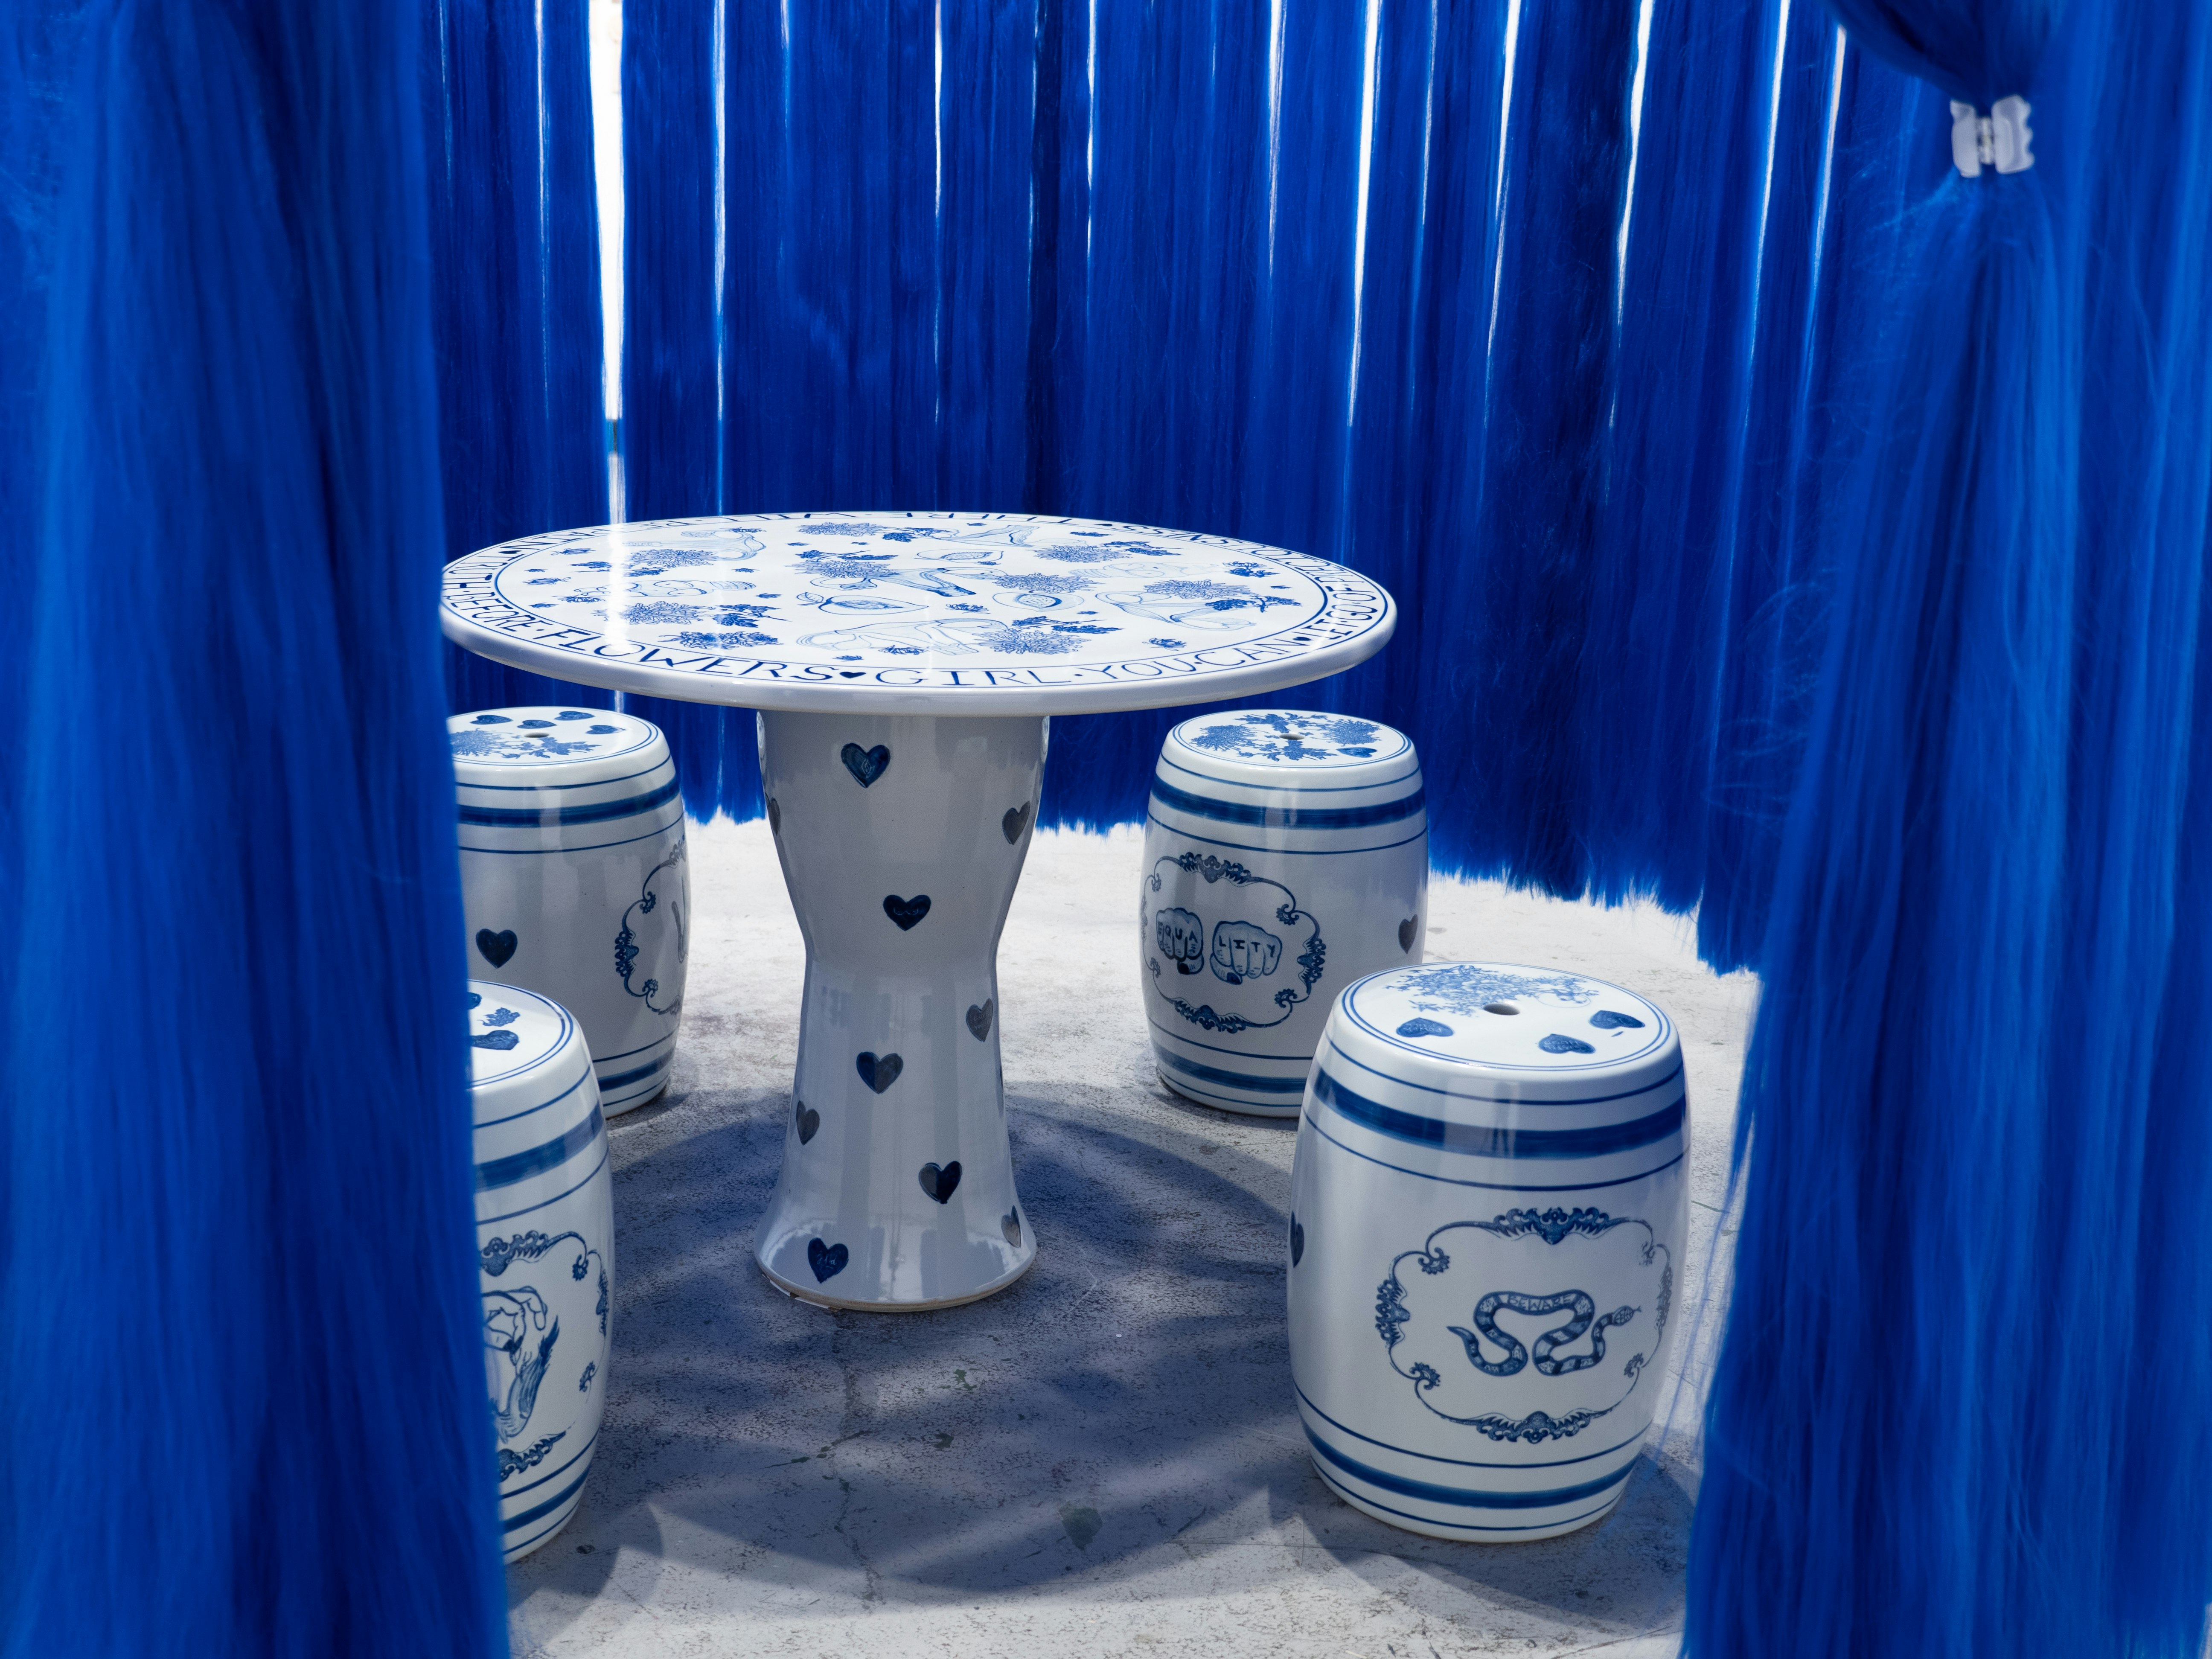 white porcelain table and with four barrel shaped stools with blue designs surrounded by a curtain of blue hair